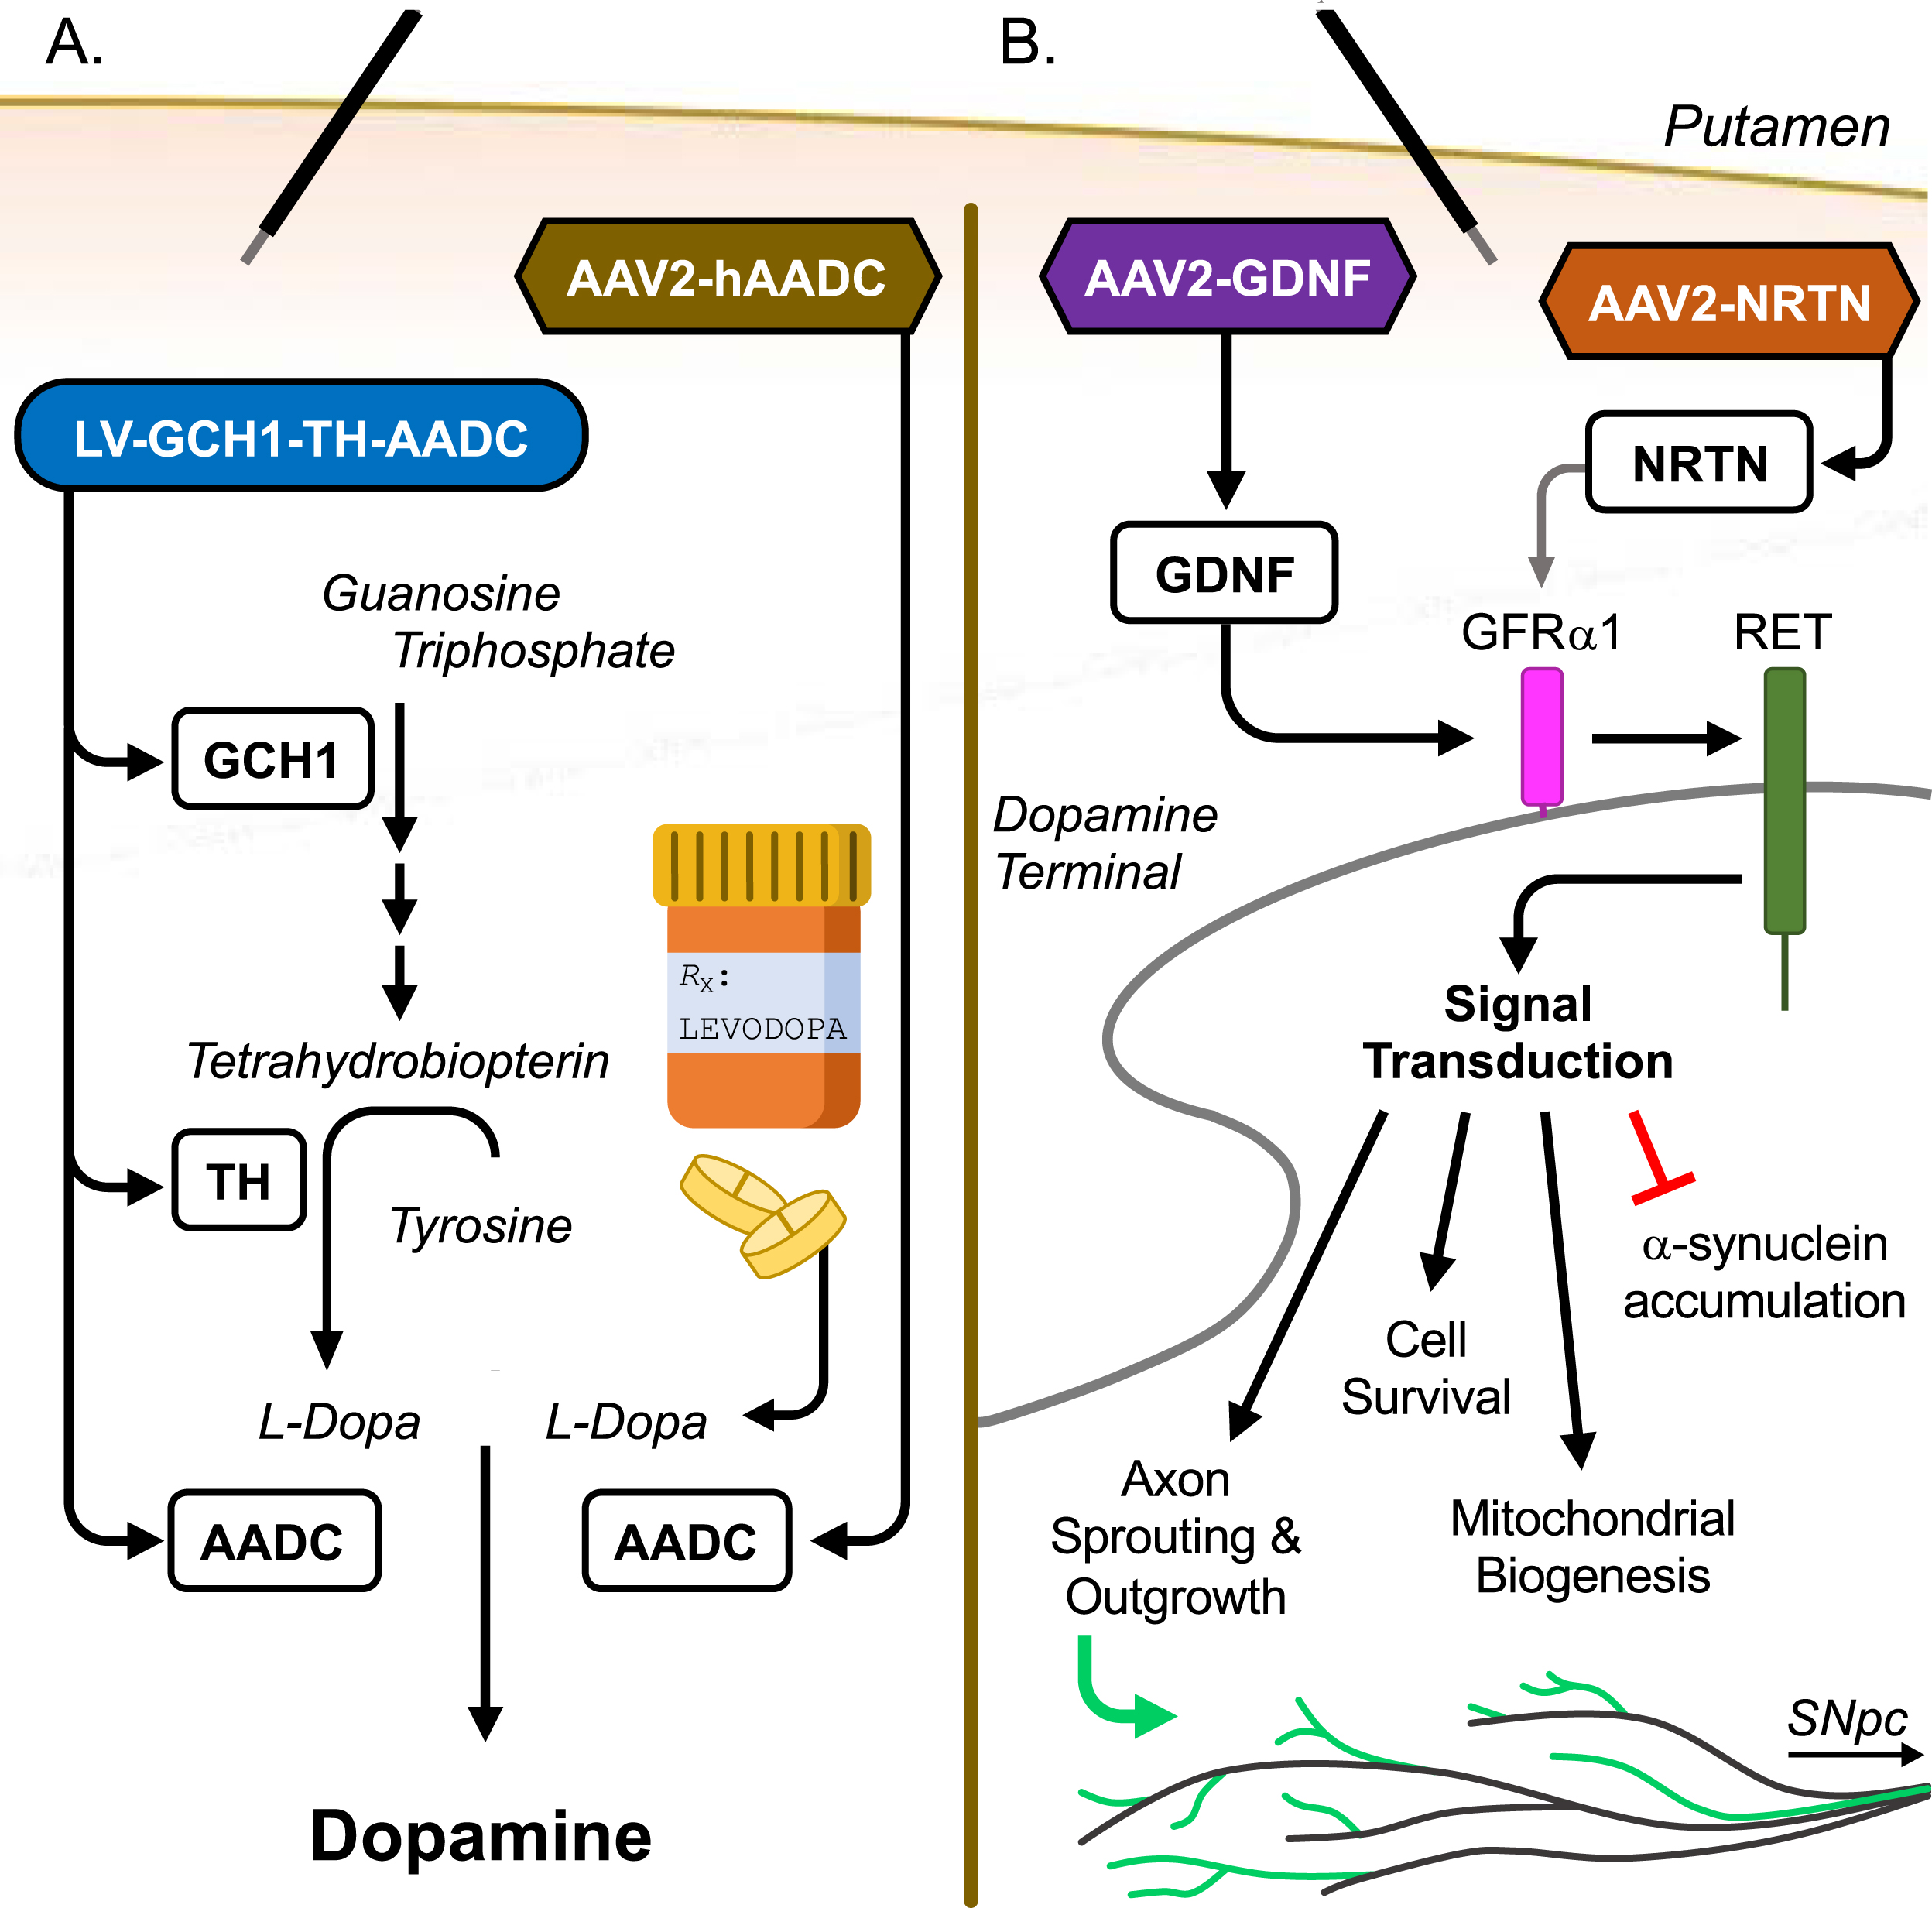 Methods of Action for Current Gene Therapies. A) Enhancement of dopamine production. LV-GCH1-TH-AADC transduction of putaminal neurons restores key enzymes of the DA production pathway, leading to increased production of the TH co-factor tetrahydrobiopterin (via GCH1), increased production of levodopa from tyrosine (via TH), and enhanced conversion of levodopa (L-DOPA) to readily available DA (via AADC). AAV2-hAADC transduction of putaminal neurons leads to the increased local production of AADC to enhance the conversion of L-DOPA to readily available DA. Both therapies durably enhance the amount and consistent production of DA, from both endogenously produced and medication derived L-DOPA, within the putamen with the goal of reducing “Off” time symptoms [1, 2]. B) Restoration of neurotrophic signaling. Transduction of putaminal neurons by AAV2-GDNF or AAV2-NRTN leads to increased expression of glial cell line-derived neurotrophic factor (GDNF) and neurturin (NRTN), respectively, both of which are decreased in PD brain. These neurotrophic factors exert their effects by binding to GDNF family receptor α (GFRα) members on the surface of the DA neuron terminals. GDNF has a high affinity for GFRα1, which is highly expressed on DA neurons. NRTN can also bind to GFRα1, though with a lower affinity. The receptor/ligand complex attracts and activates the transmembrane receptor RET, a receptor tyrosine kinase, triggering a cell survival signaling cascade within the DA neurons. Evidence from animal models of PD have shown that enhanced neurotrophic factor expression in the striatum can protect against nigrostriatal DA neuron loss, reduce α-synuclein accumulation in DA neurons, improve mitochondrial biogenesis and function, and encourage sprouting and growth of DA axons [14, 15, 58].